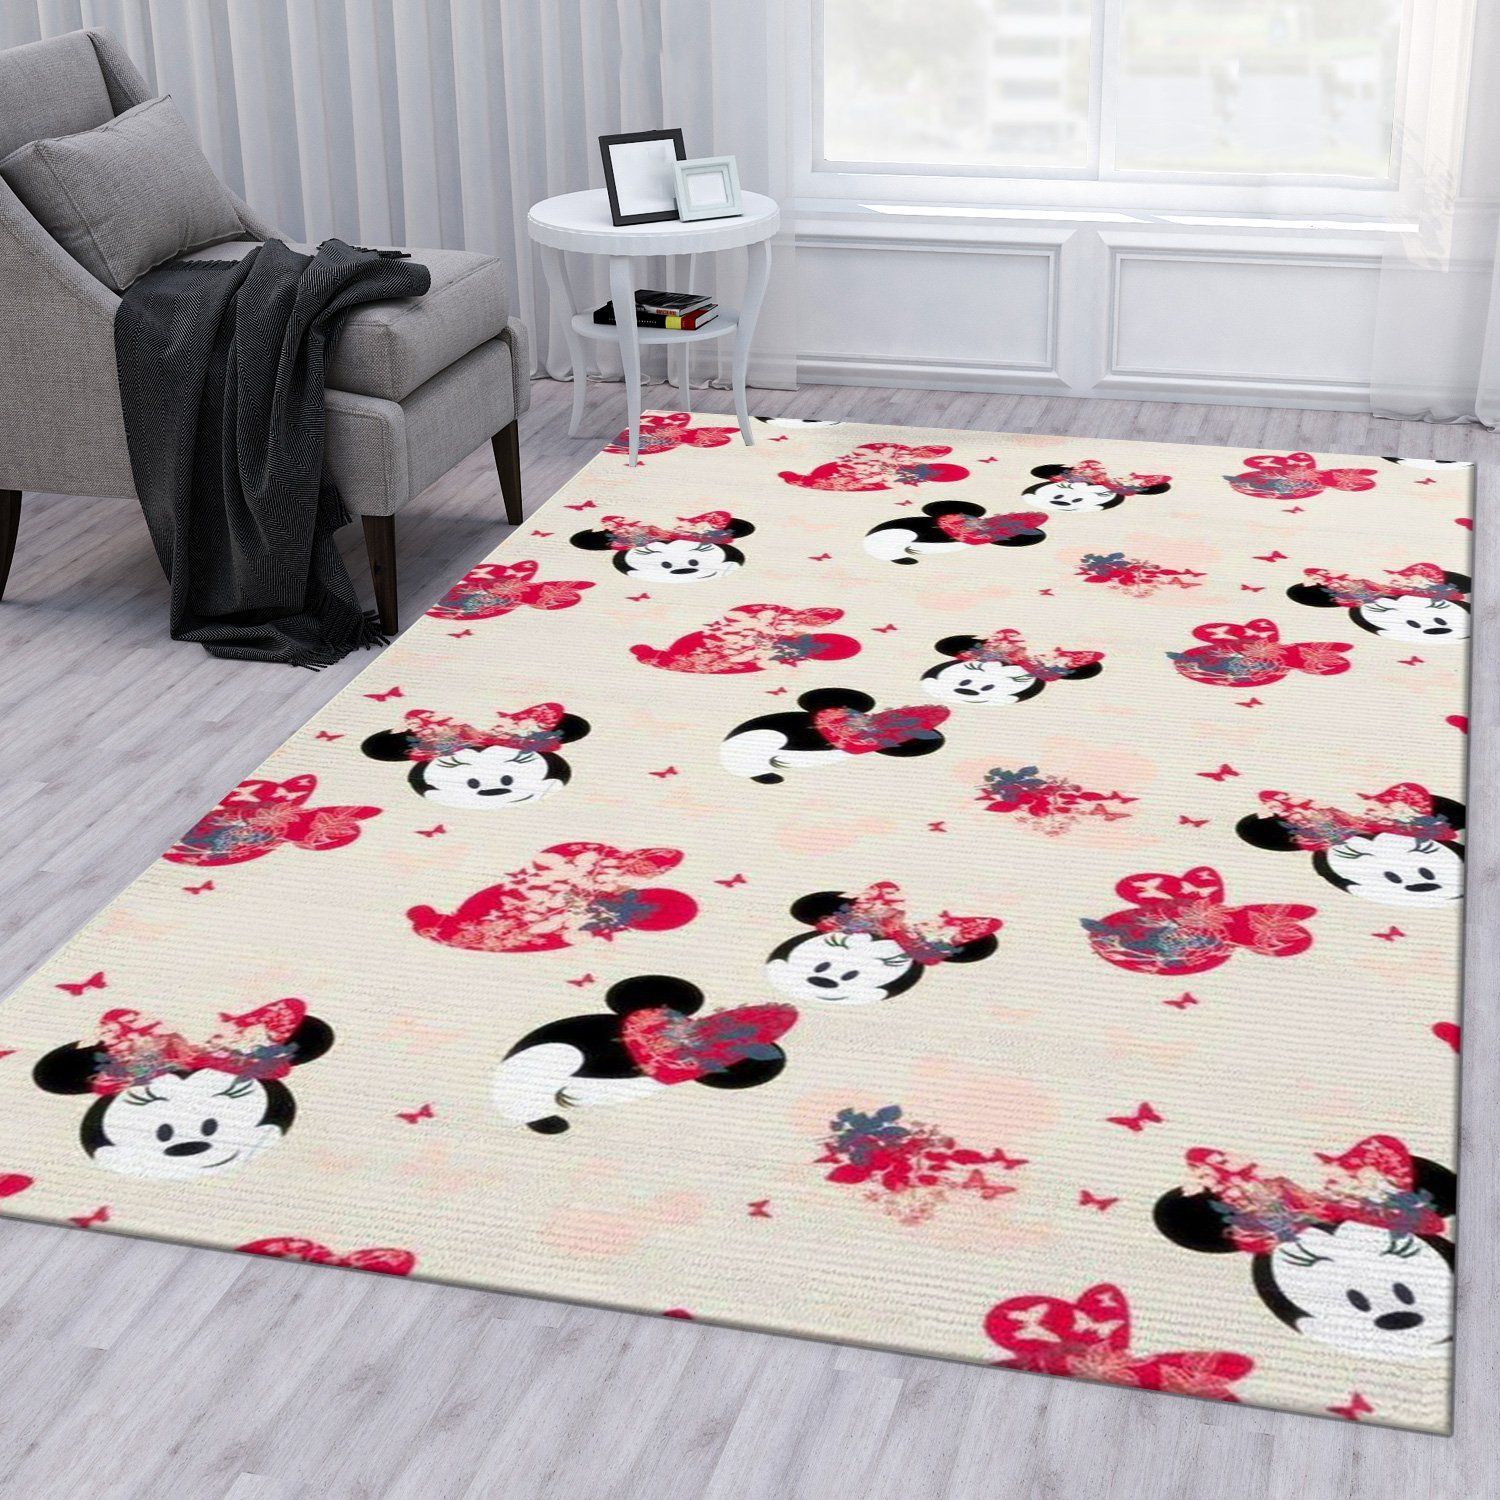 Minnie Mouse Ver3 Movie Area Rug Bedroom Rug Home US Decor - Indoor Outdoor Rugs